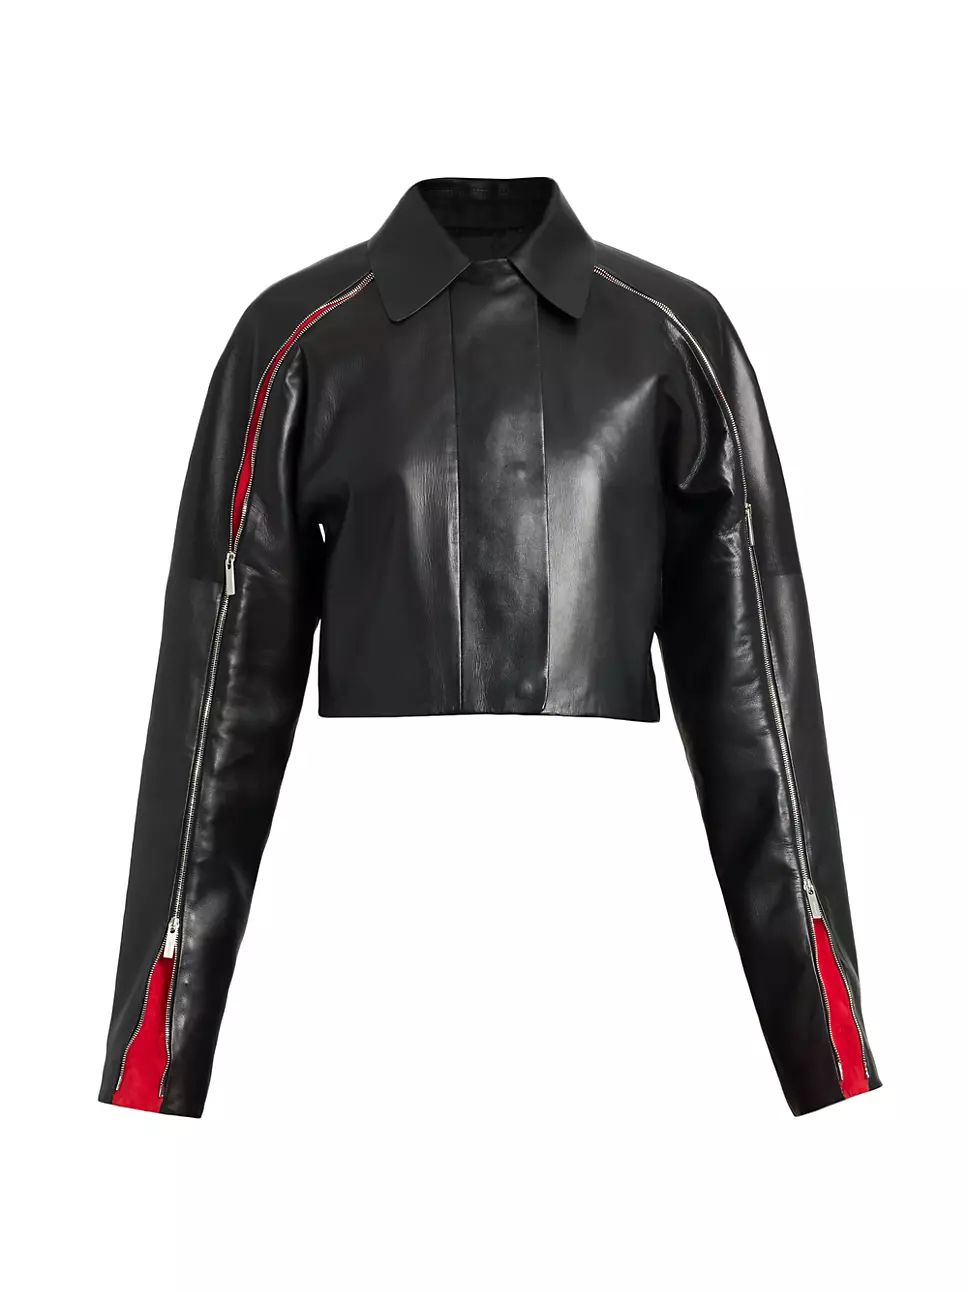 FERRAGAMO


Two-Tone Leather Biker Jacket



3.1 out of 5 Customer Rating | Saks Fifth Avenue